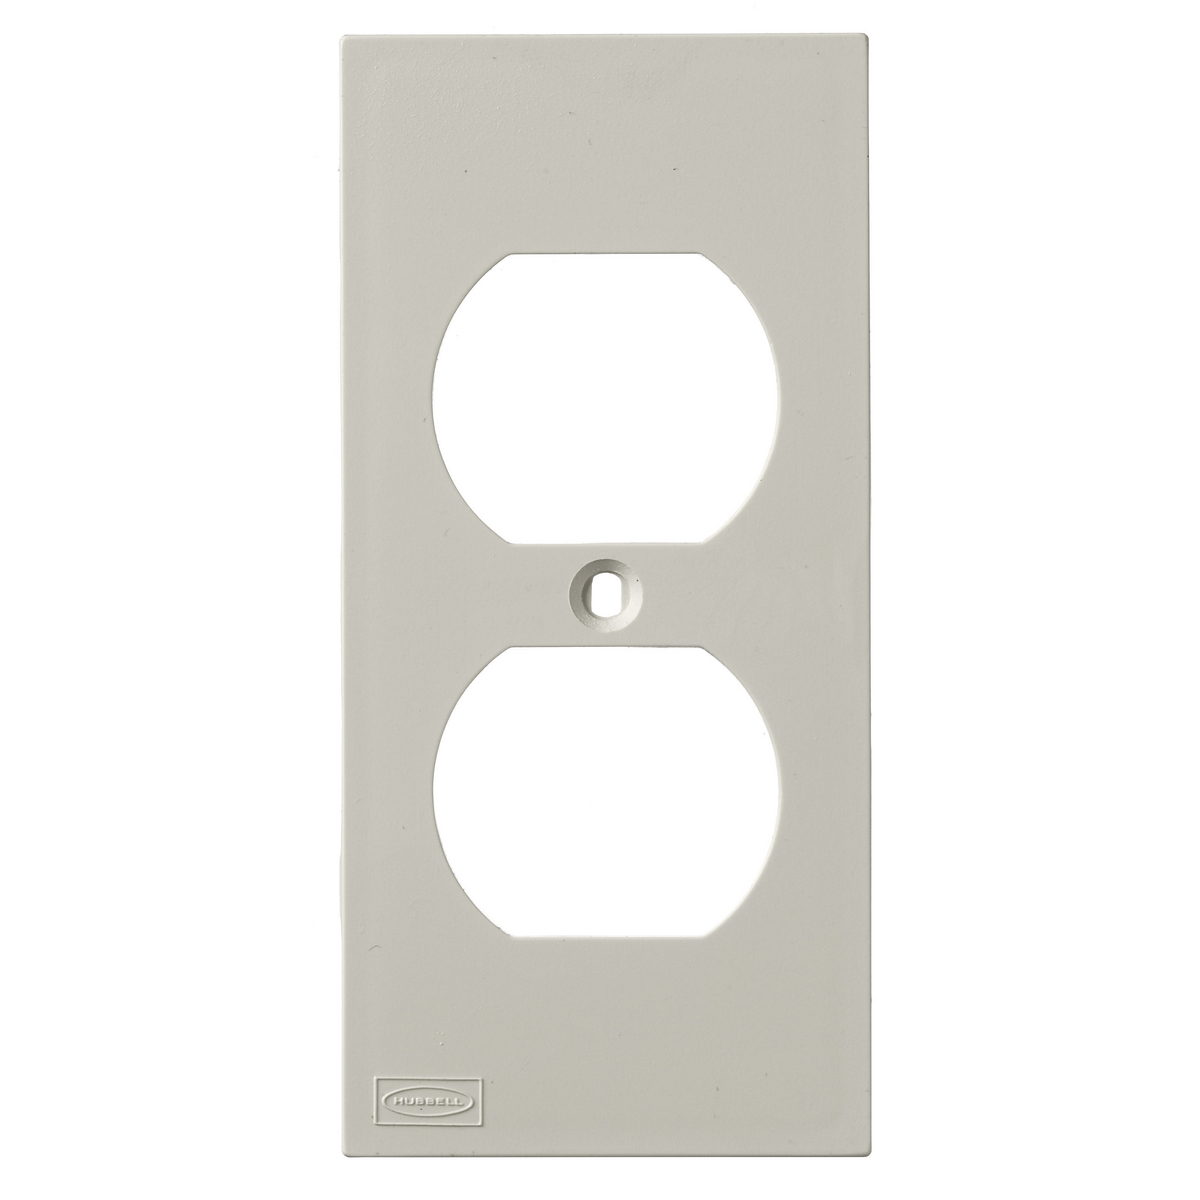 KP8 783585335438 Hubbell Wiring Device Kellems, Device Plates and Accessories, FacePlate, KP Series, 1-Gang, Duplex Opening, Office White